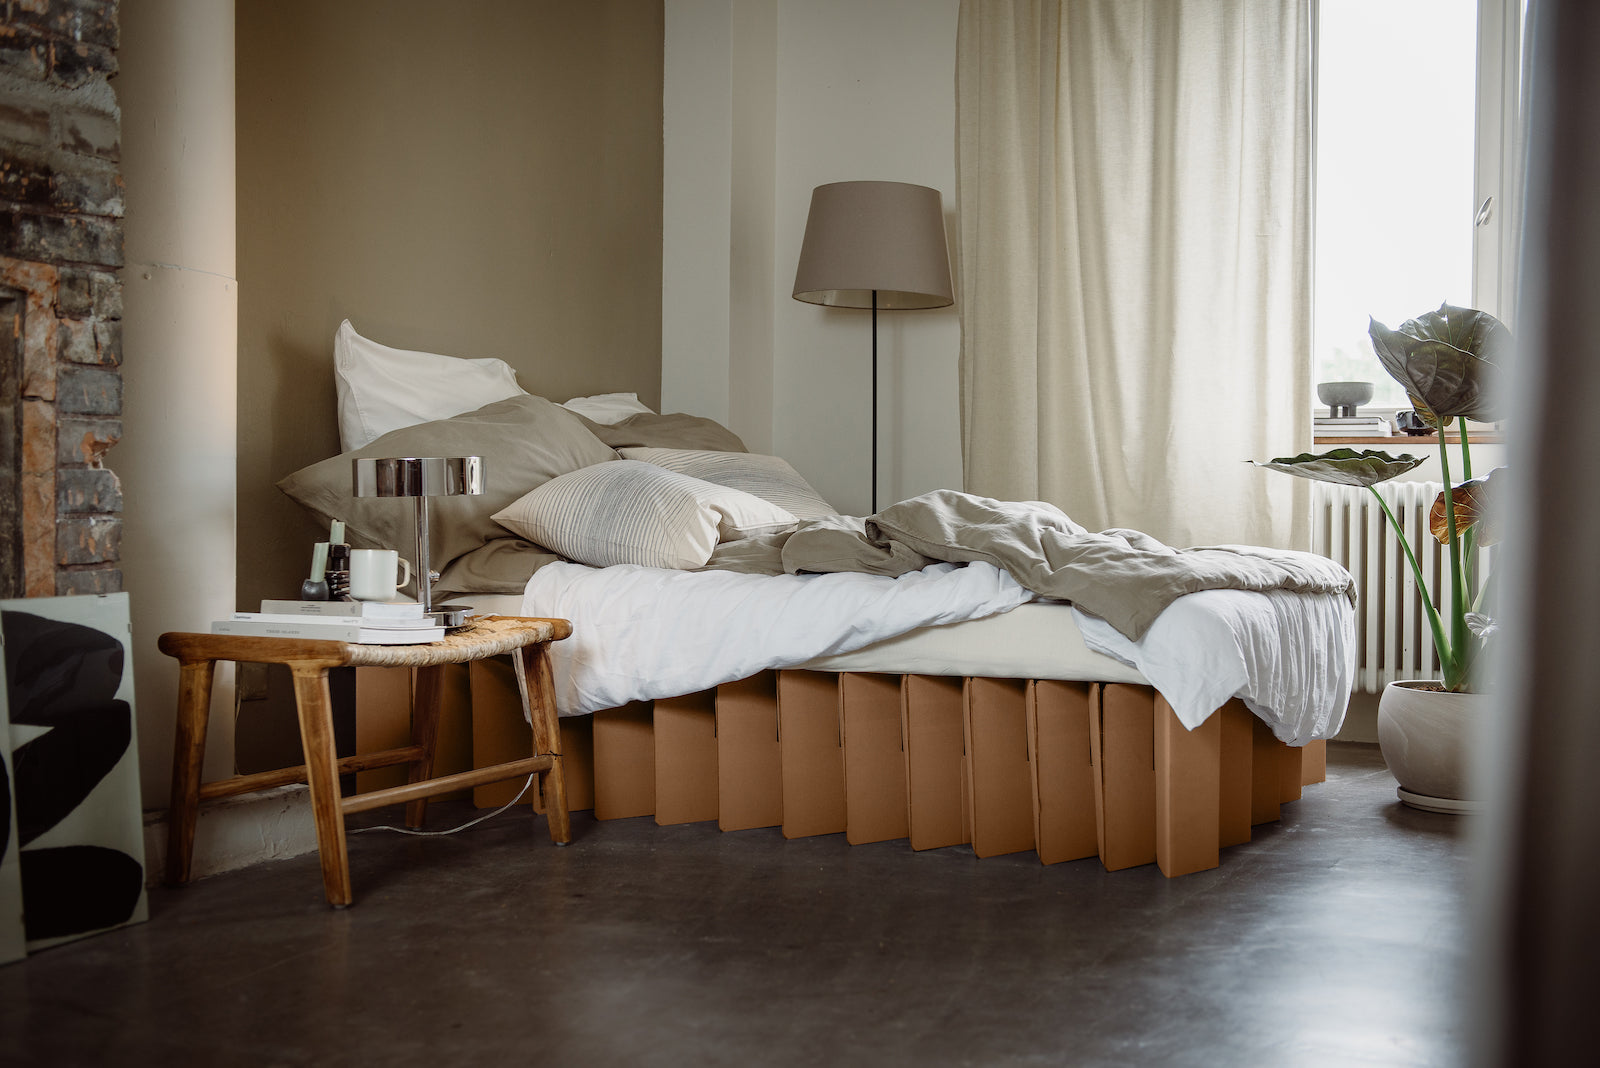 twin size Bett 2.0, a sustainable bed frame by RIAB USA, shown on in a room with primarily gray decor and white comforter